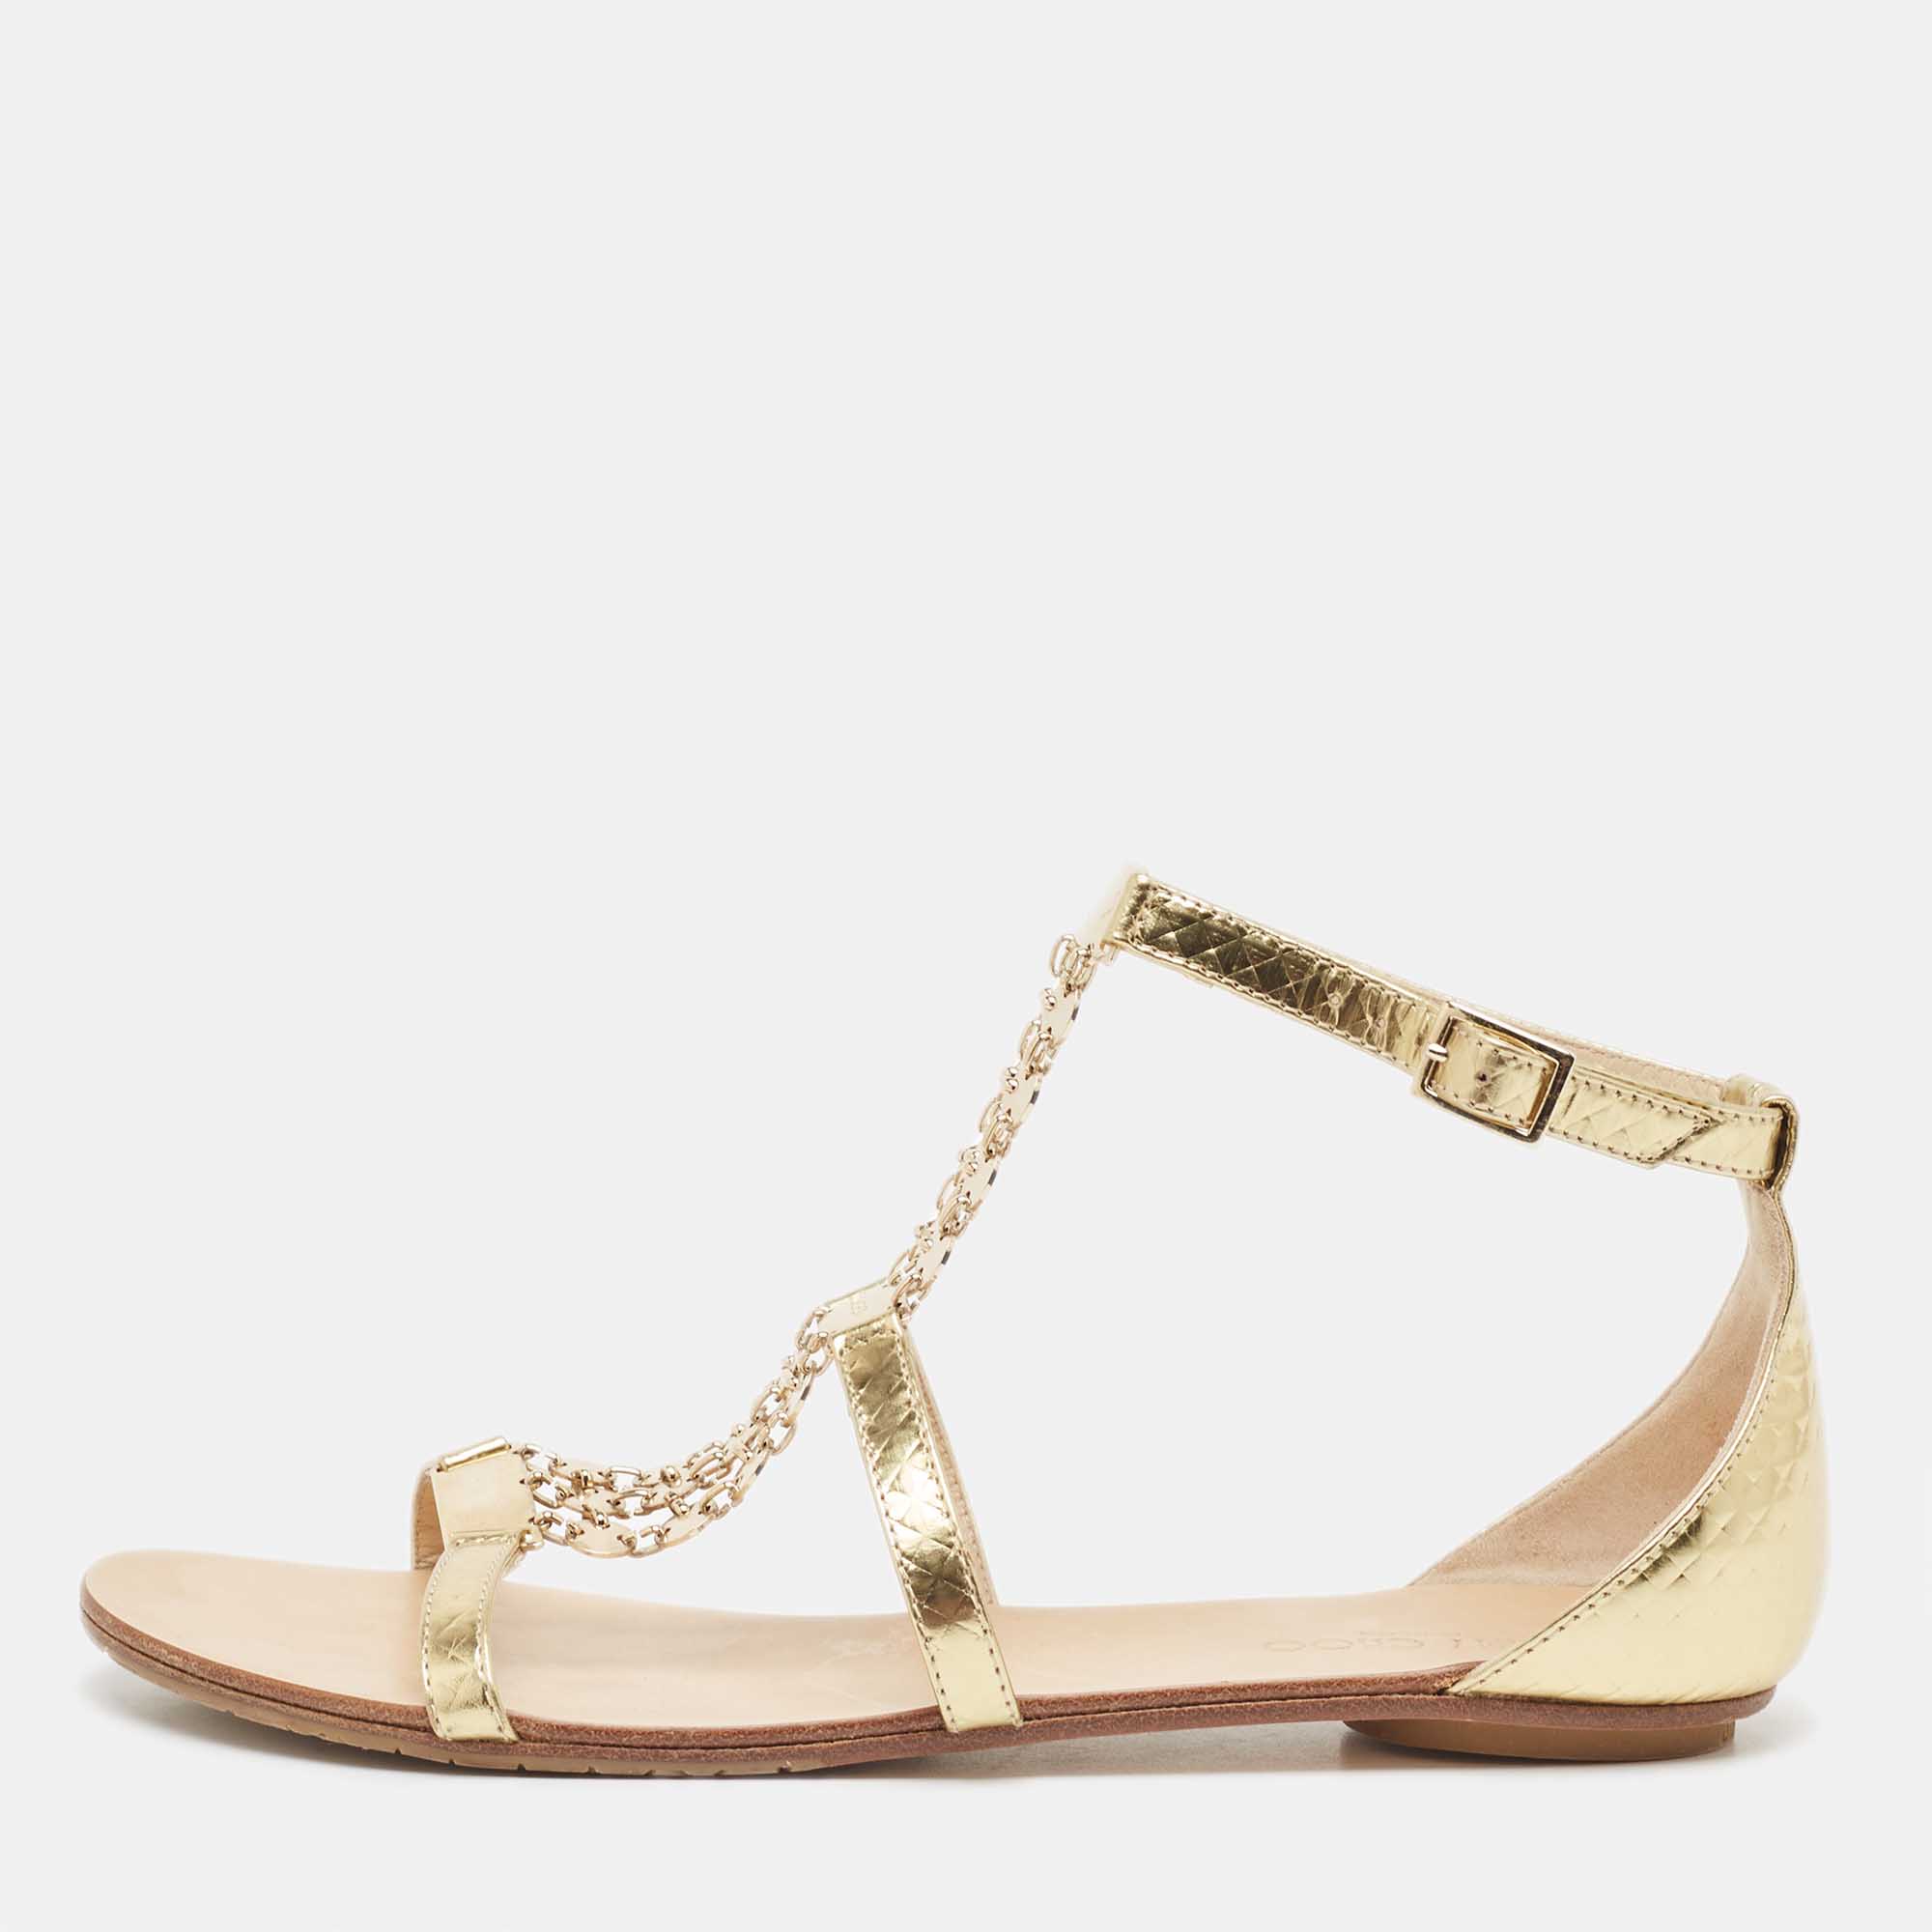 Pre-owned Jimmy Choo Gold Textured Leather Wyatt Flat Sandals Size 36